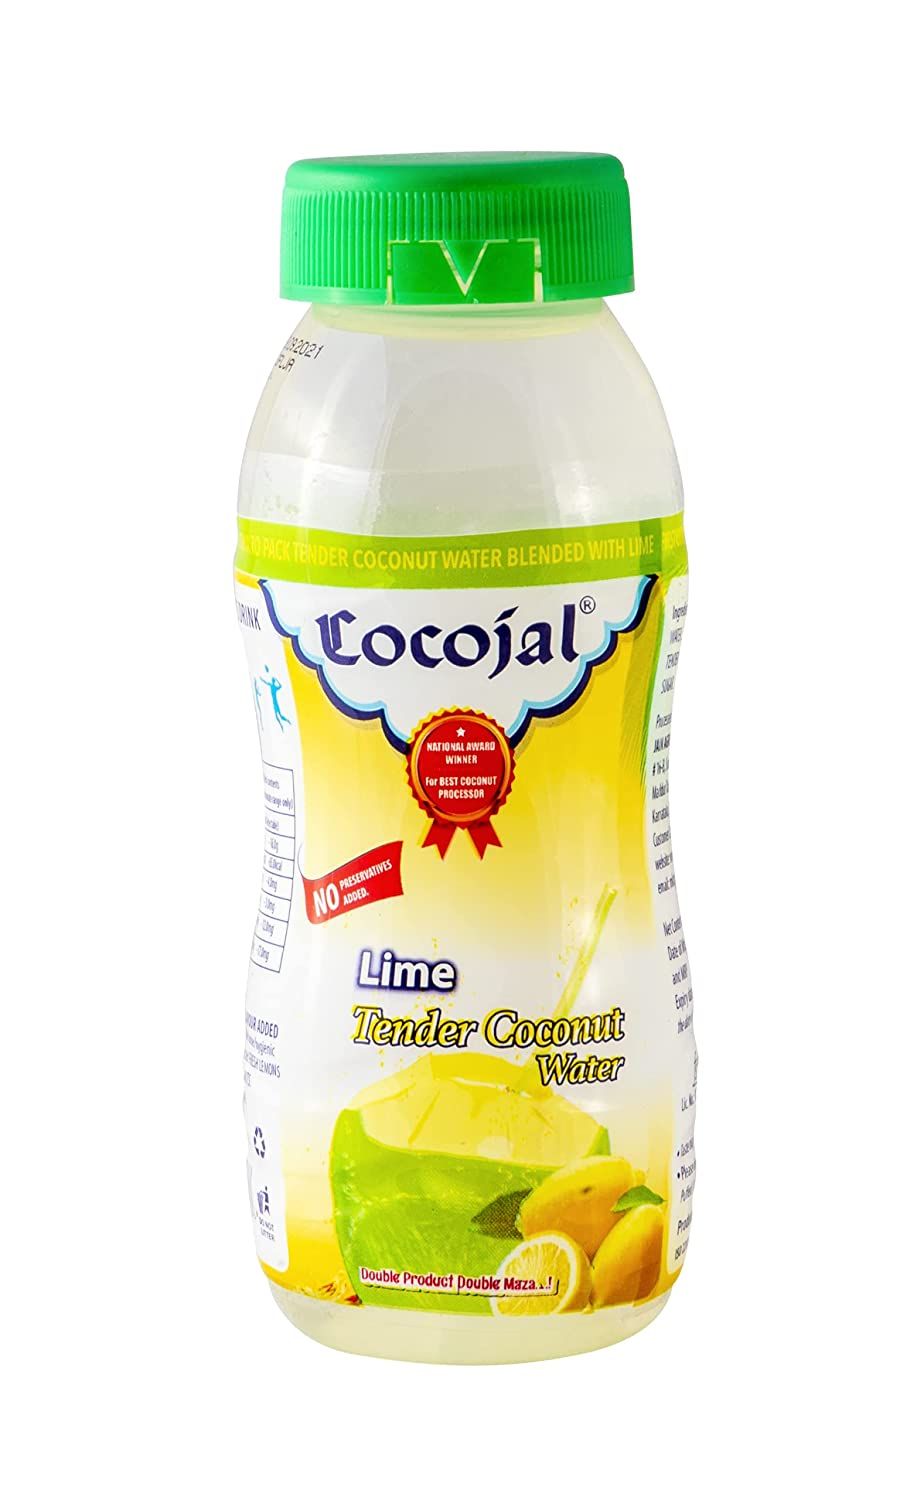 Cocojal Lime Tender Coconut Water Image